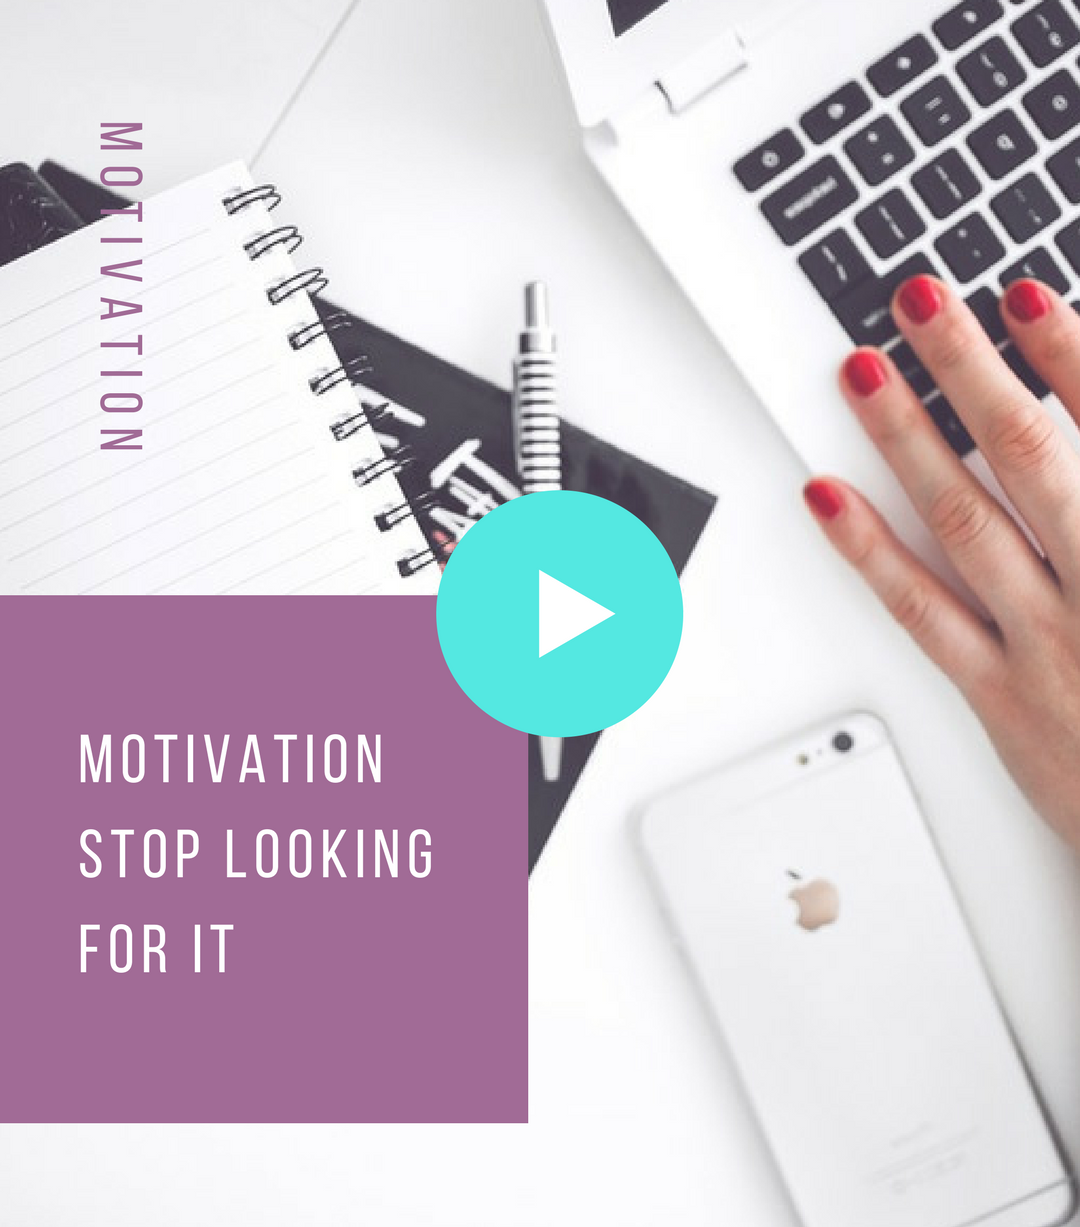 Motivation – Stop Looking For It